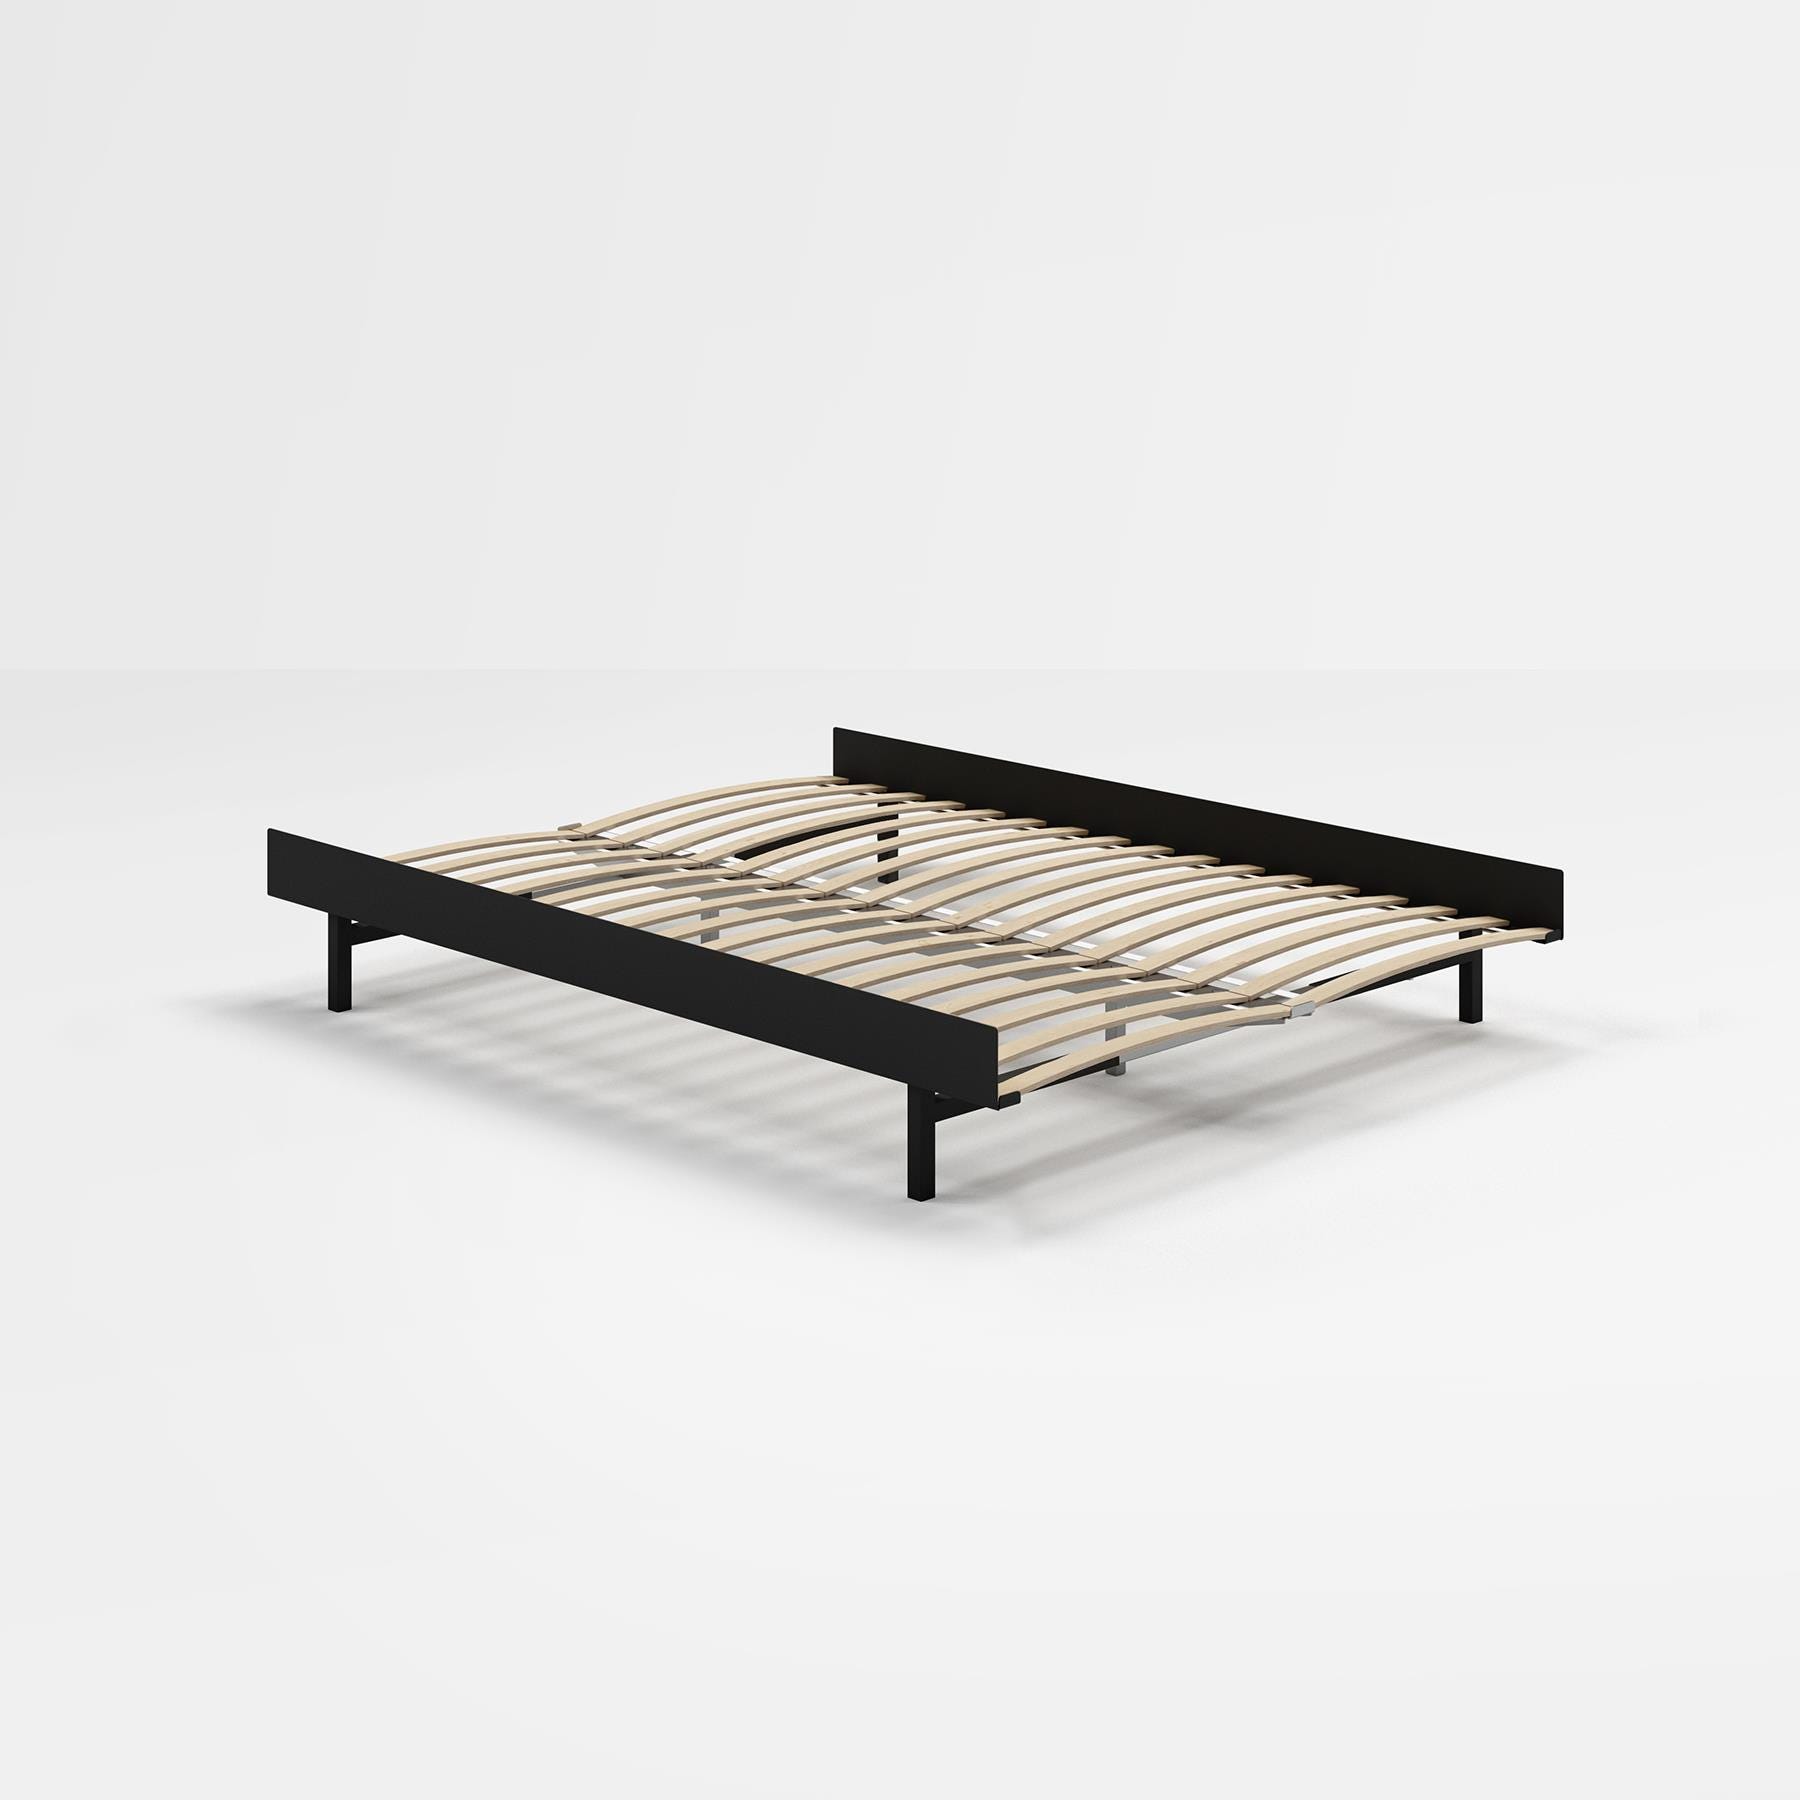 Moebe Bed Double Black No Side Table Black Designer Furniture From Holloways Of Ludlow